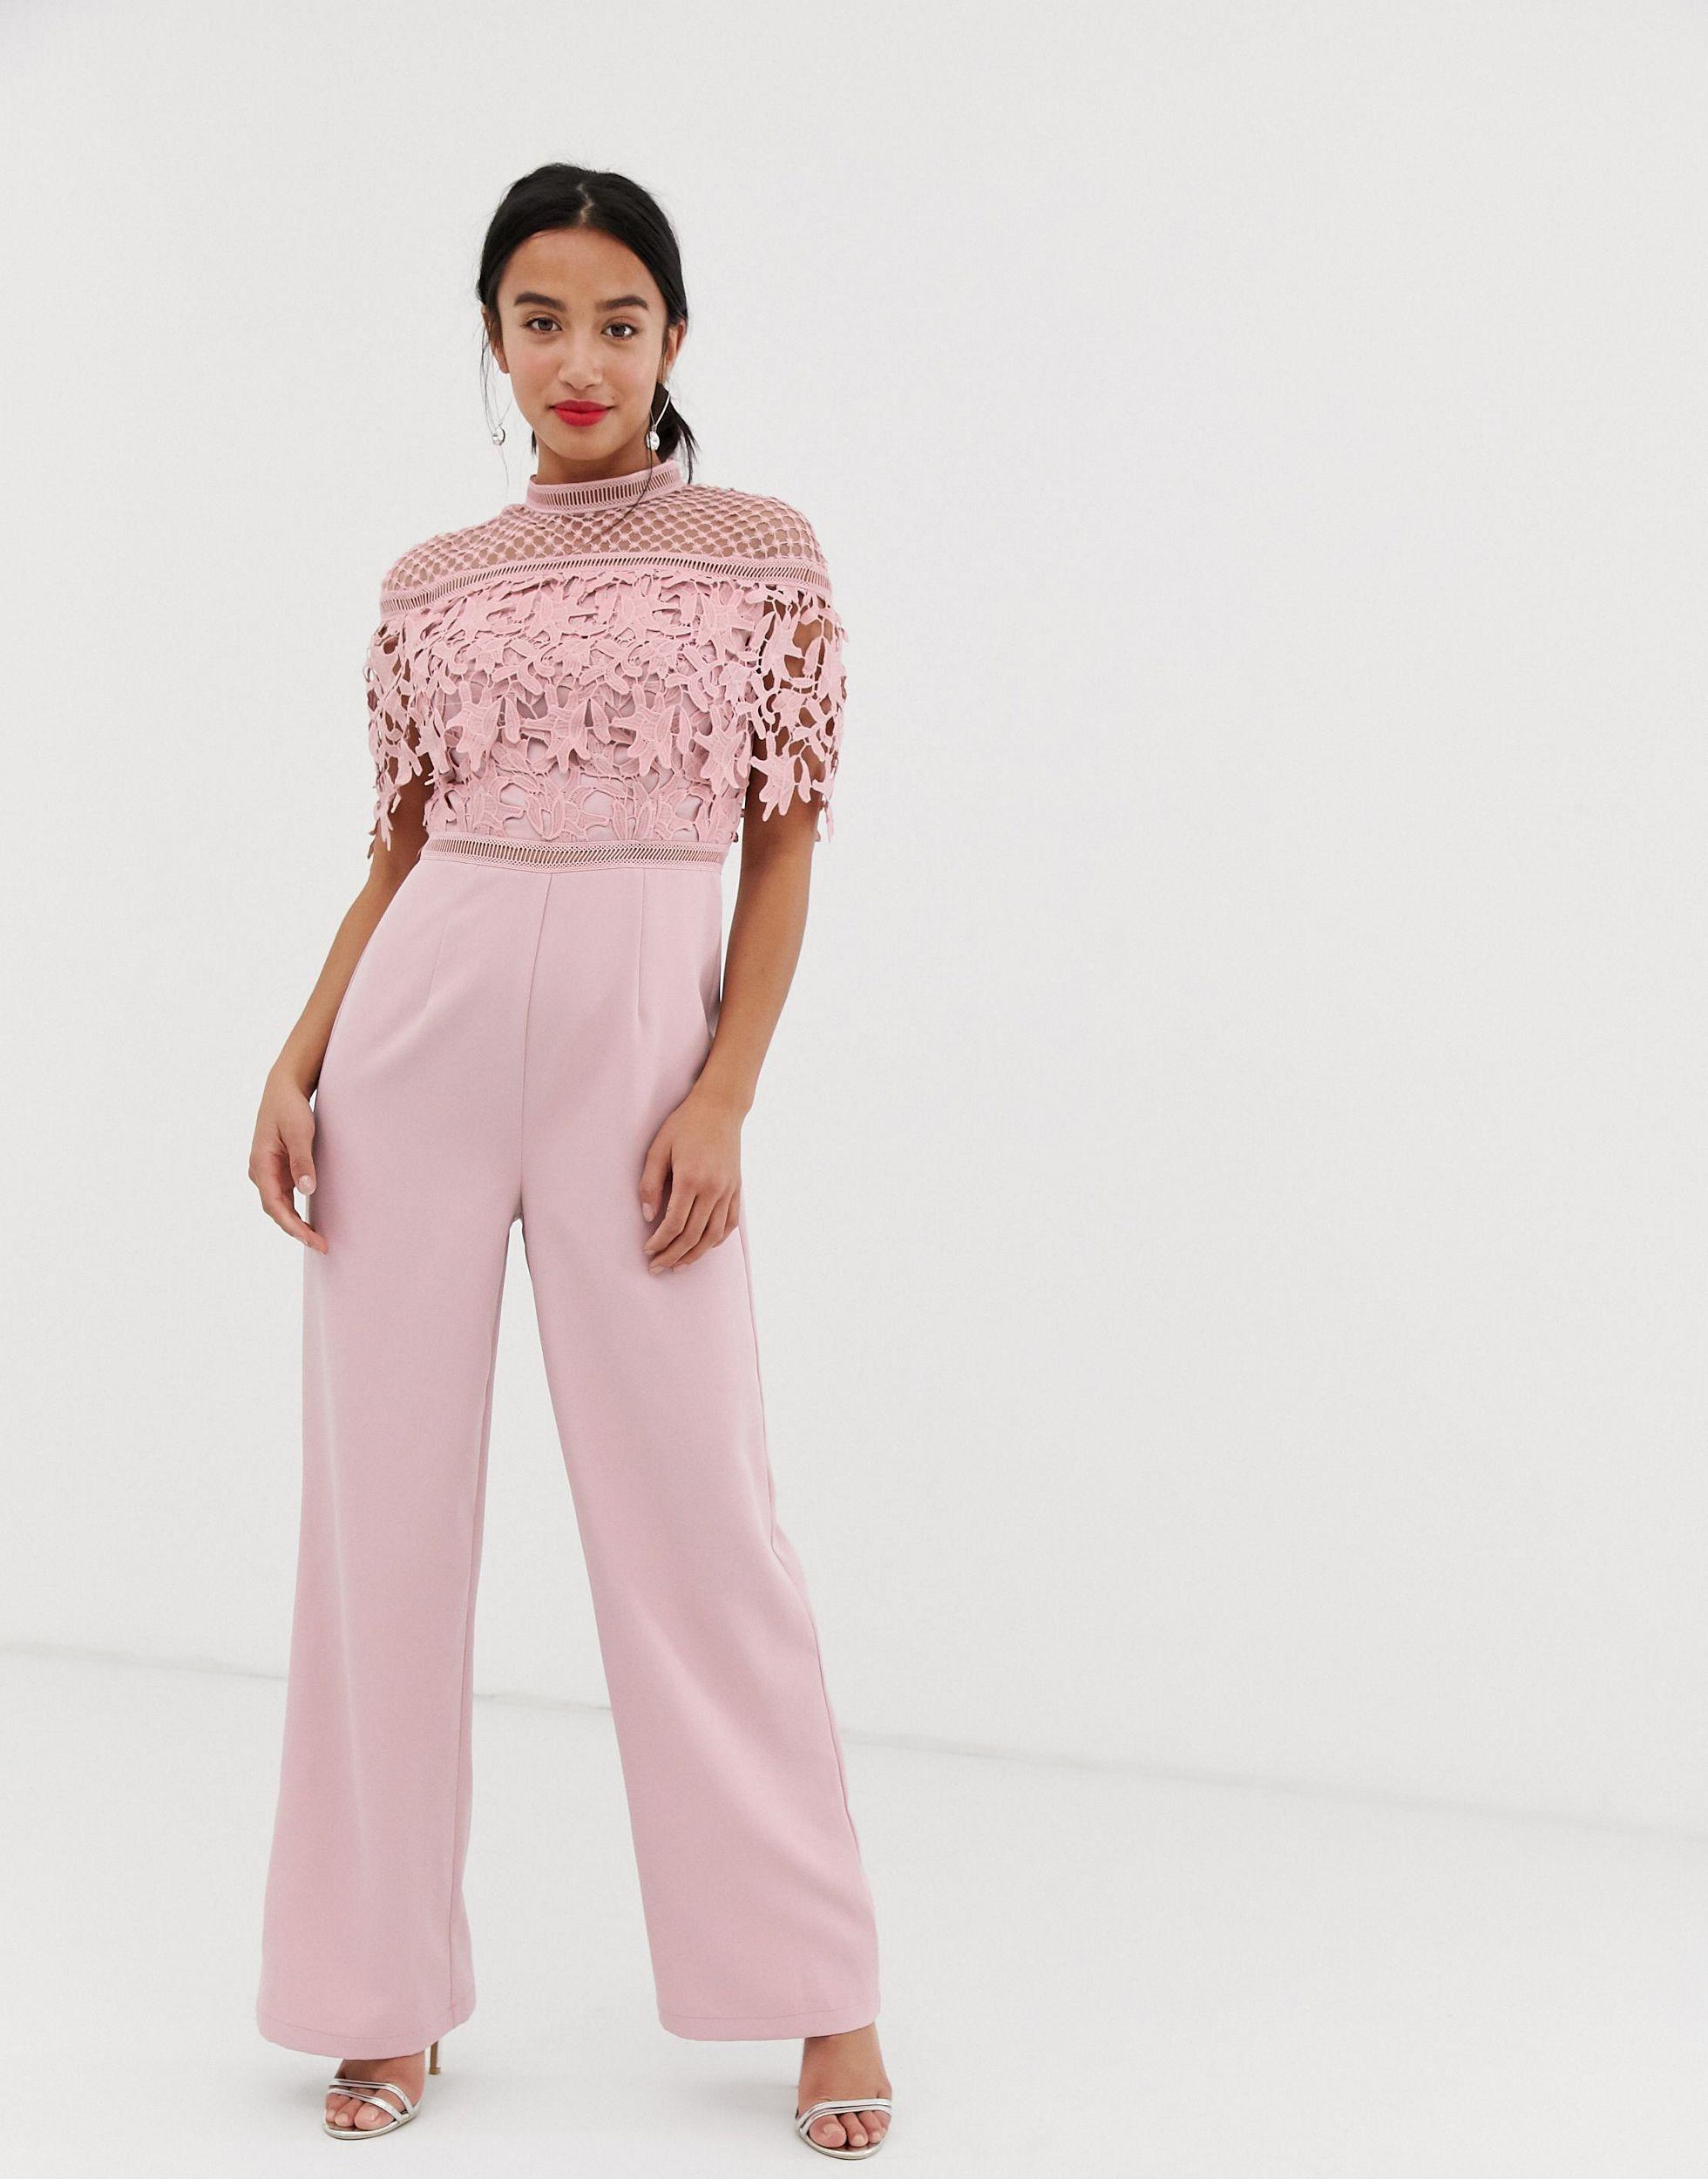 Chi Chi London High Neck Lace Top Jumpsuit in Pink Lyst.